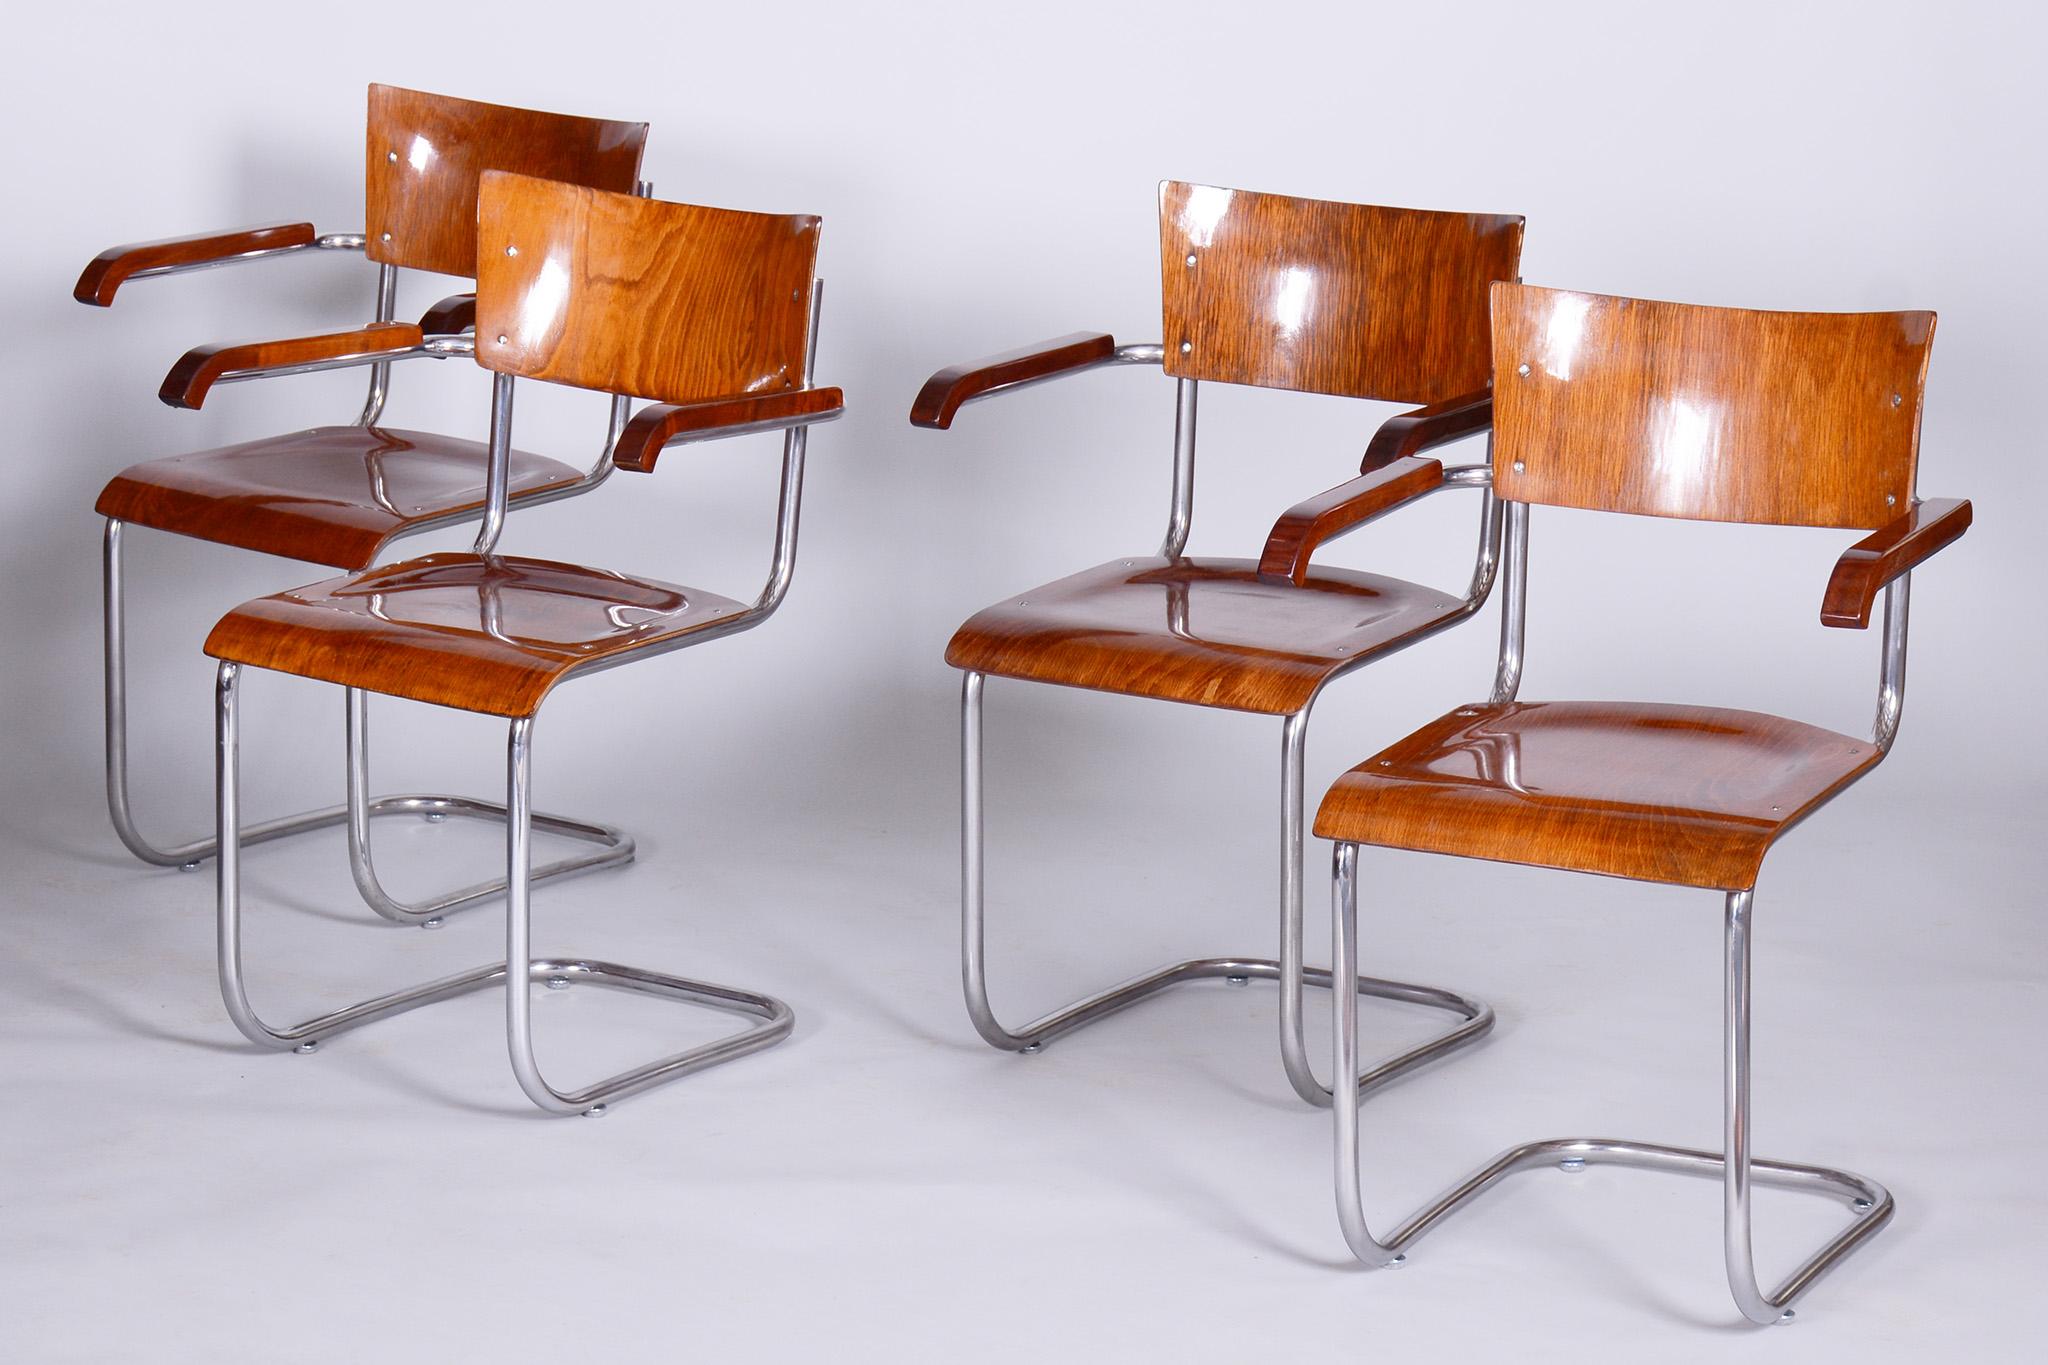 20th Century Set of 4 Restored Bauhaus Beech Armchairs Designed by Mart Stam, 1930s, Czechia For Sale